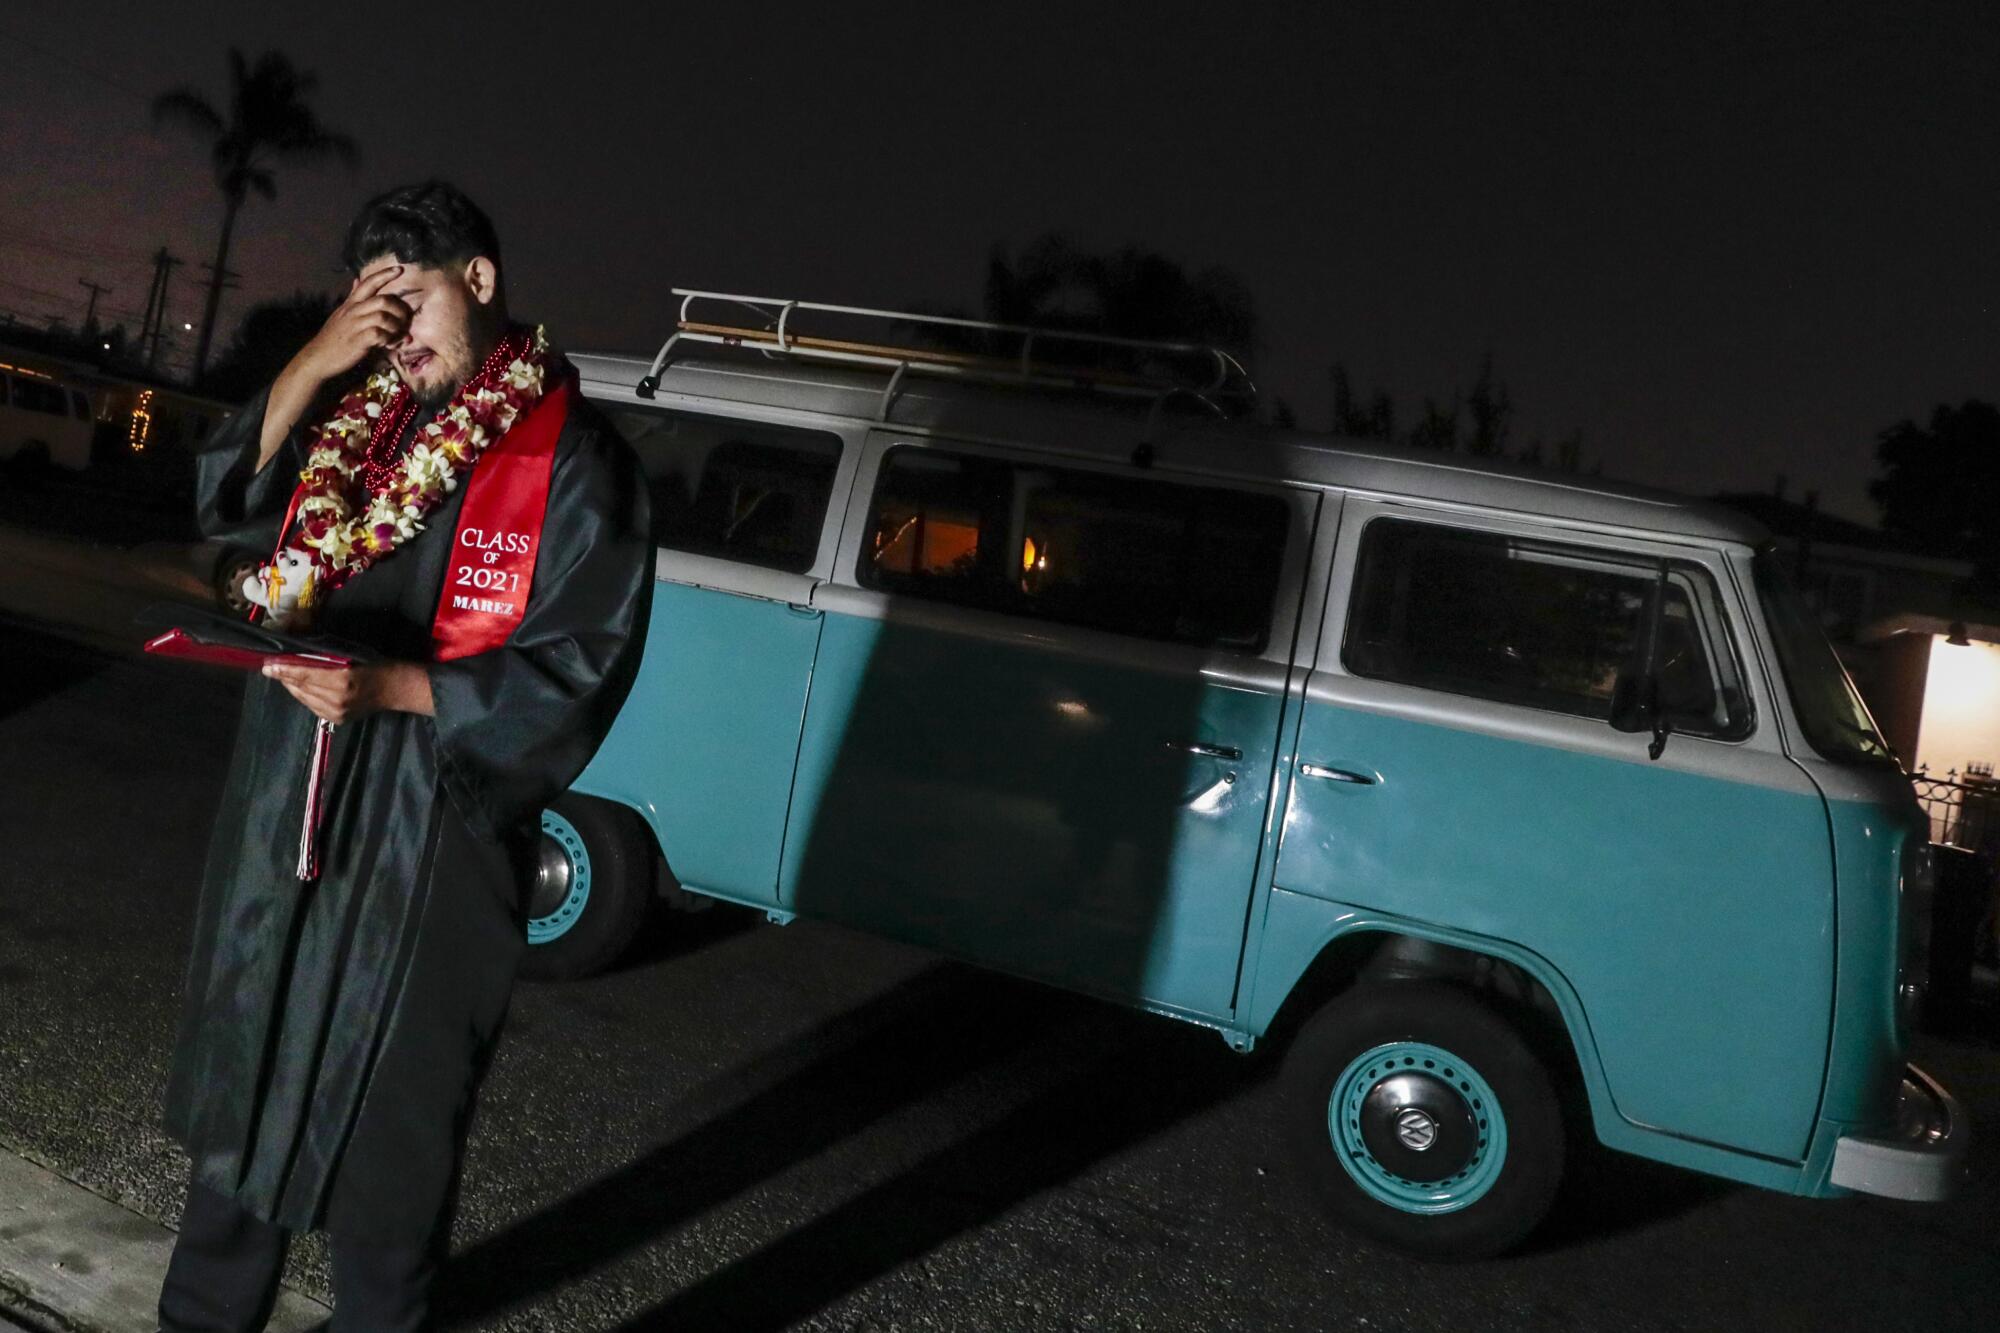 Cesar Martinez composes himself while having photos taken in front of a vintage VW van he helped his brother restore.